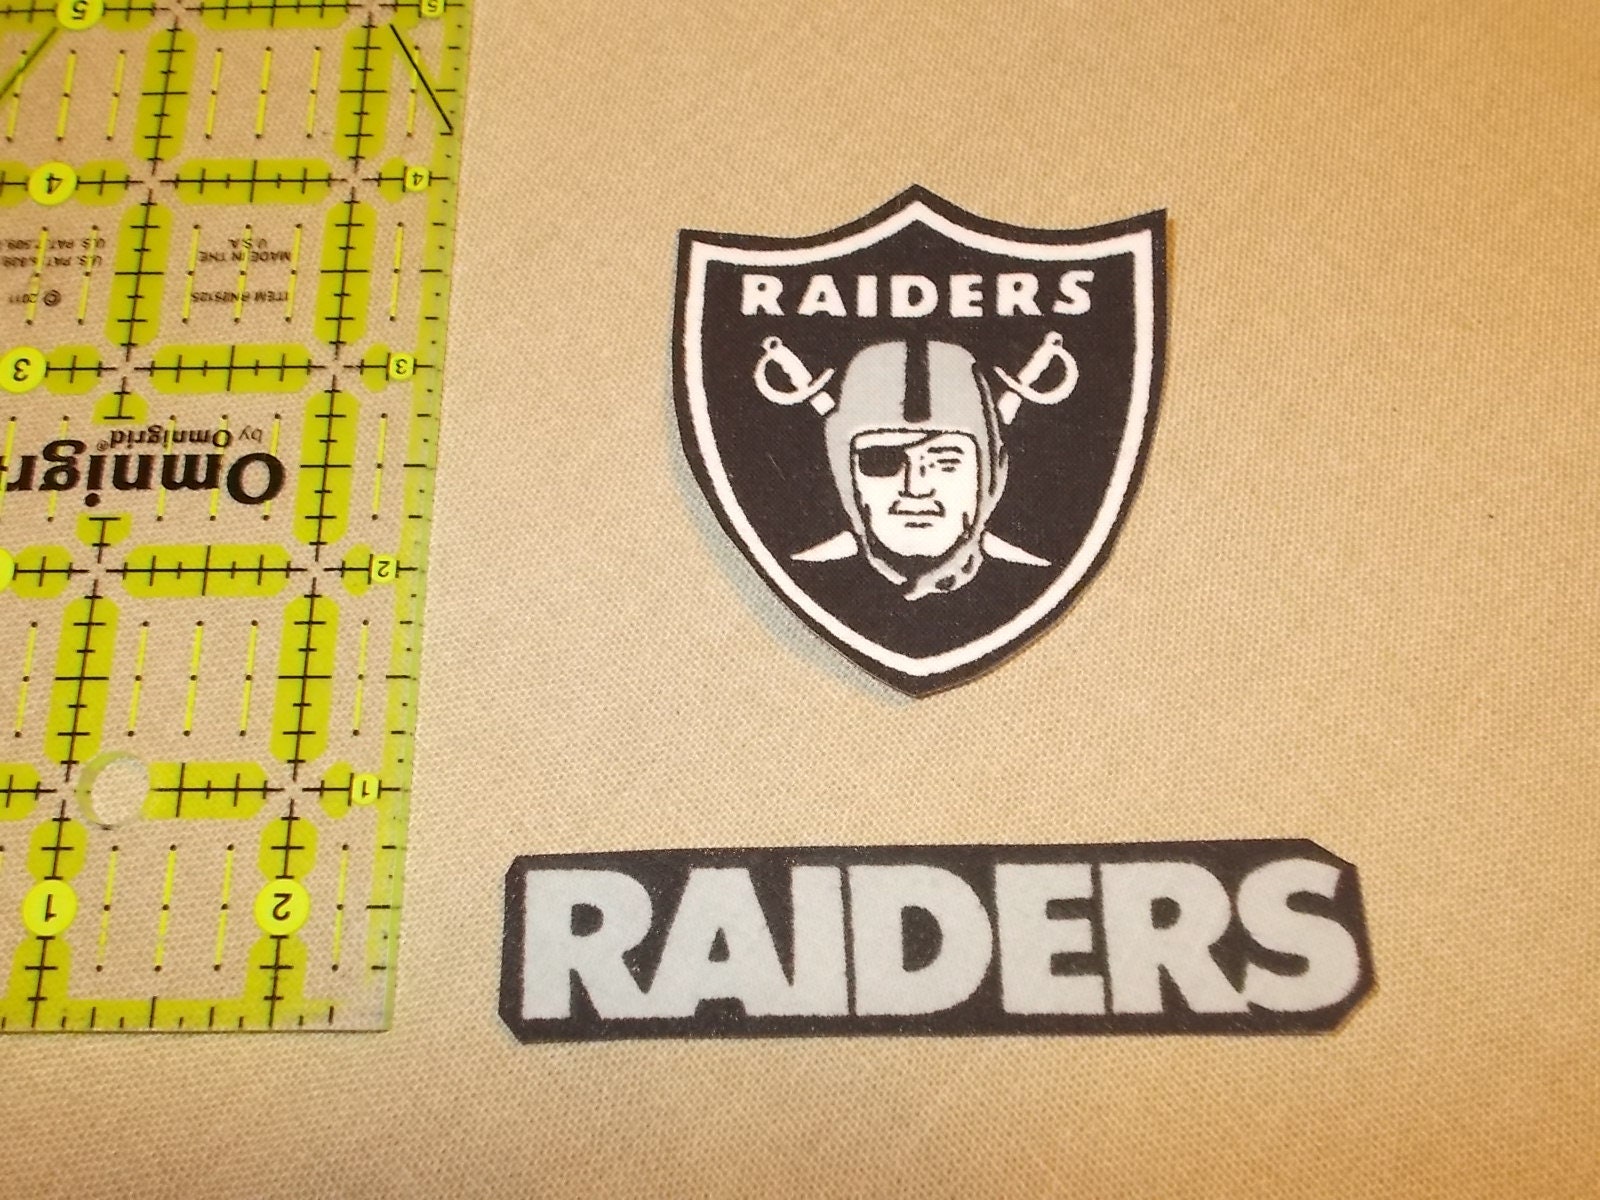 (1) NFL OAKLAND RAIDERS LOGO PATCH IRON-ON ITEM 4 inch